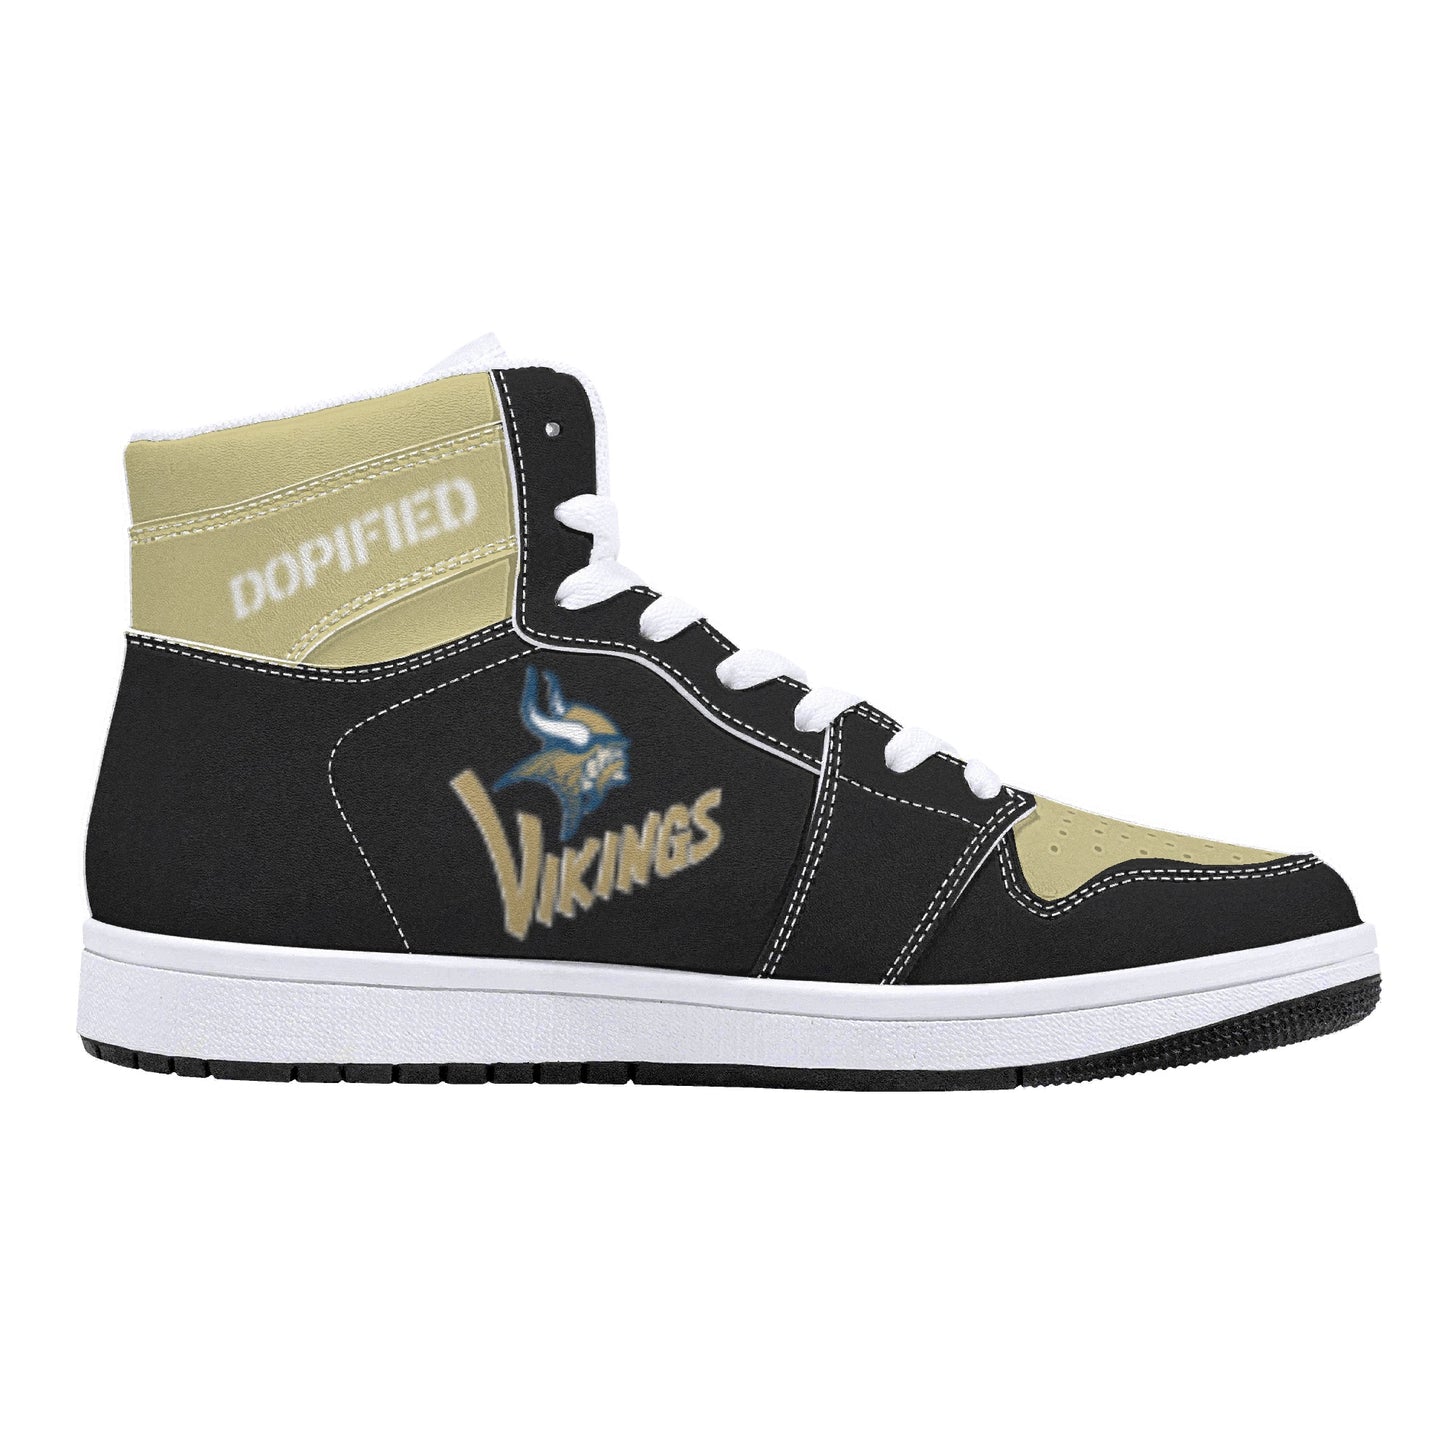 Bros "Viking Hyphy ViBe GameDay" High Top Sneakers